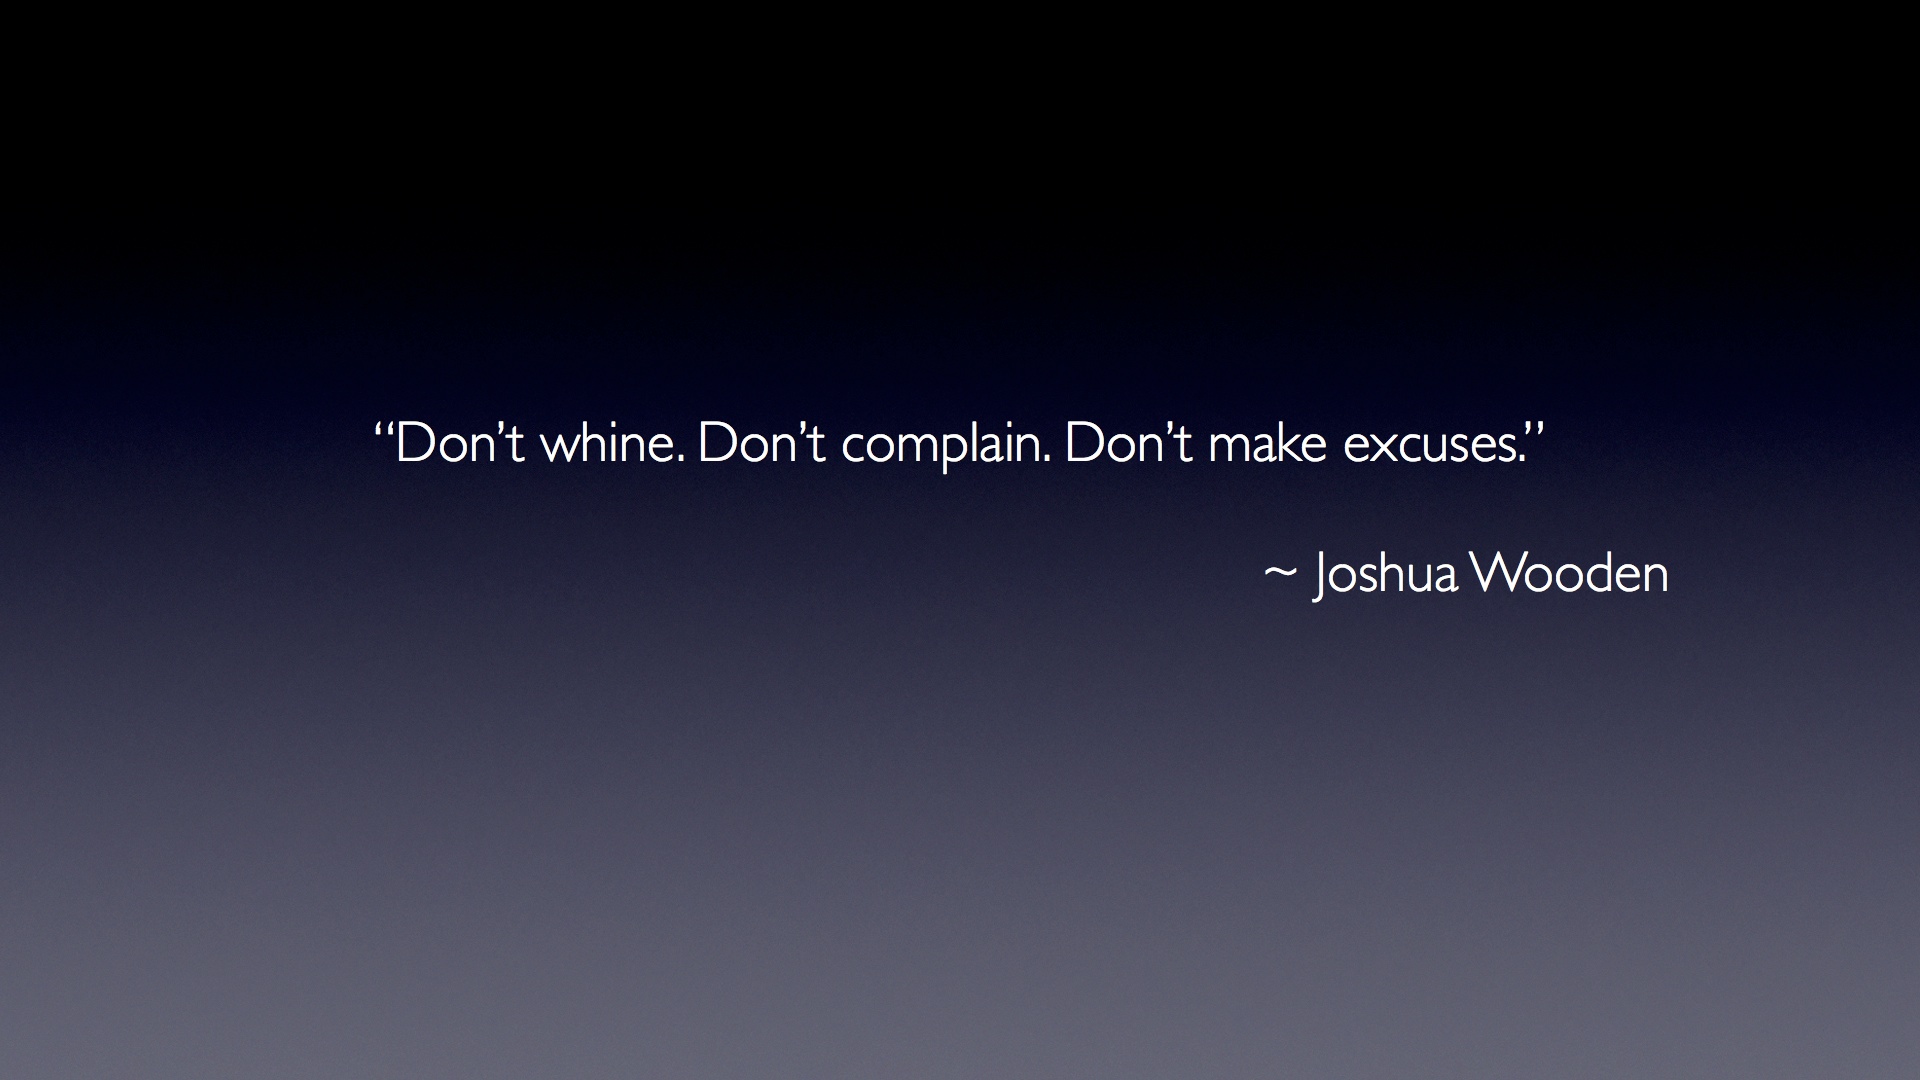 "Don't Whine. Don't Complain. Don't Make Excuses."